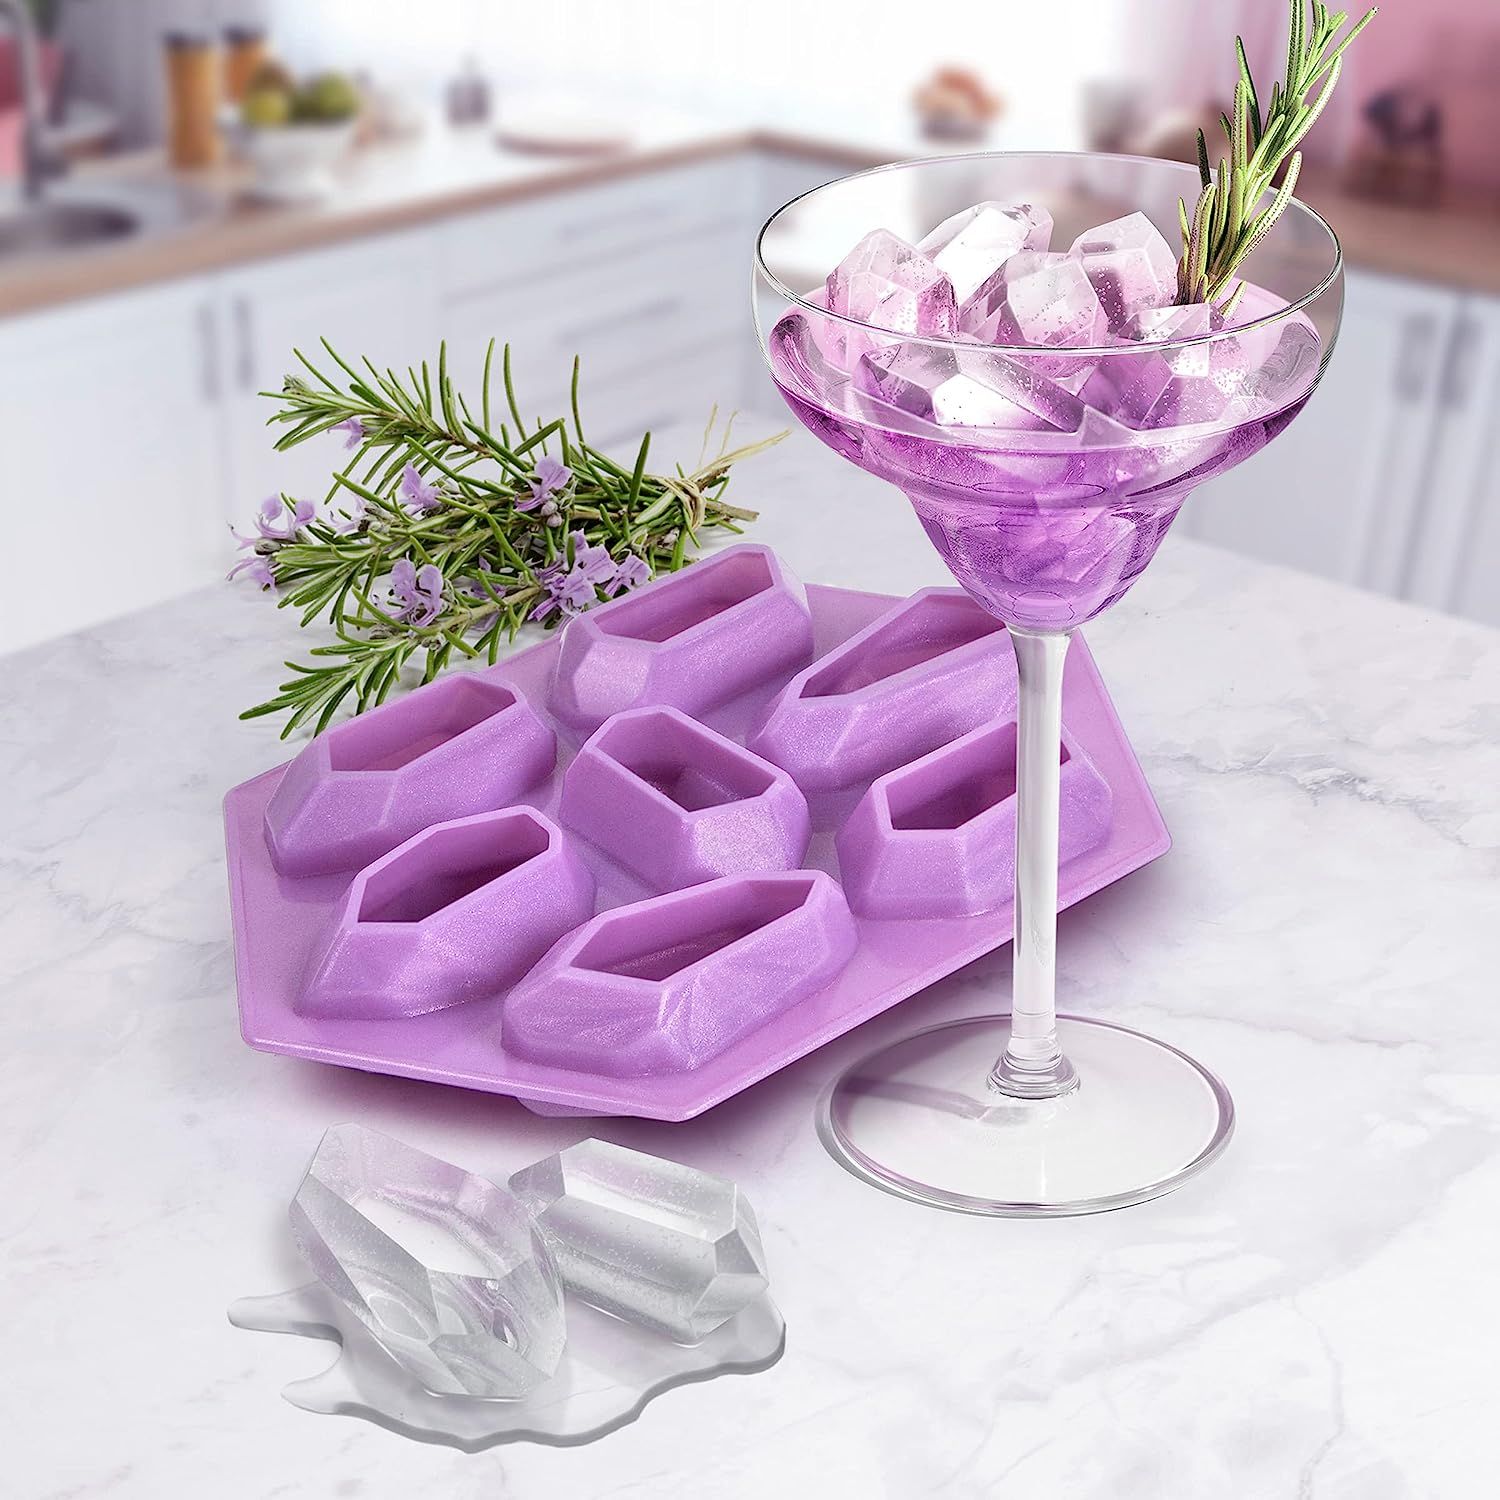 9 Weird Ice Cube Molds That Will Make Your Friends Laugh